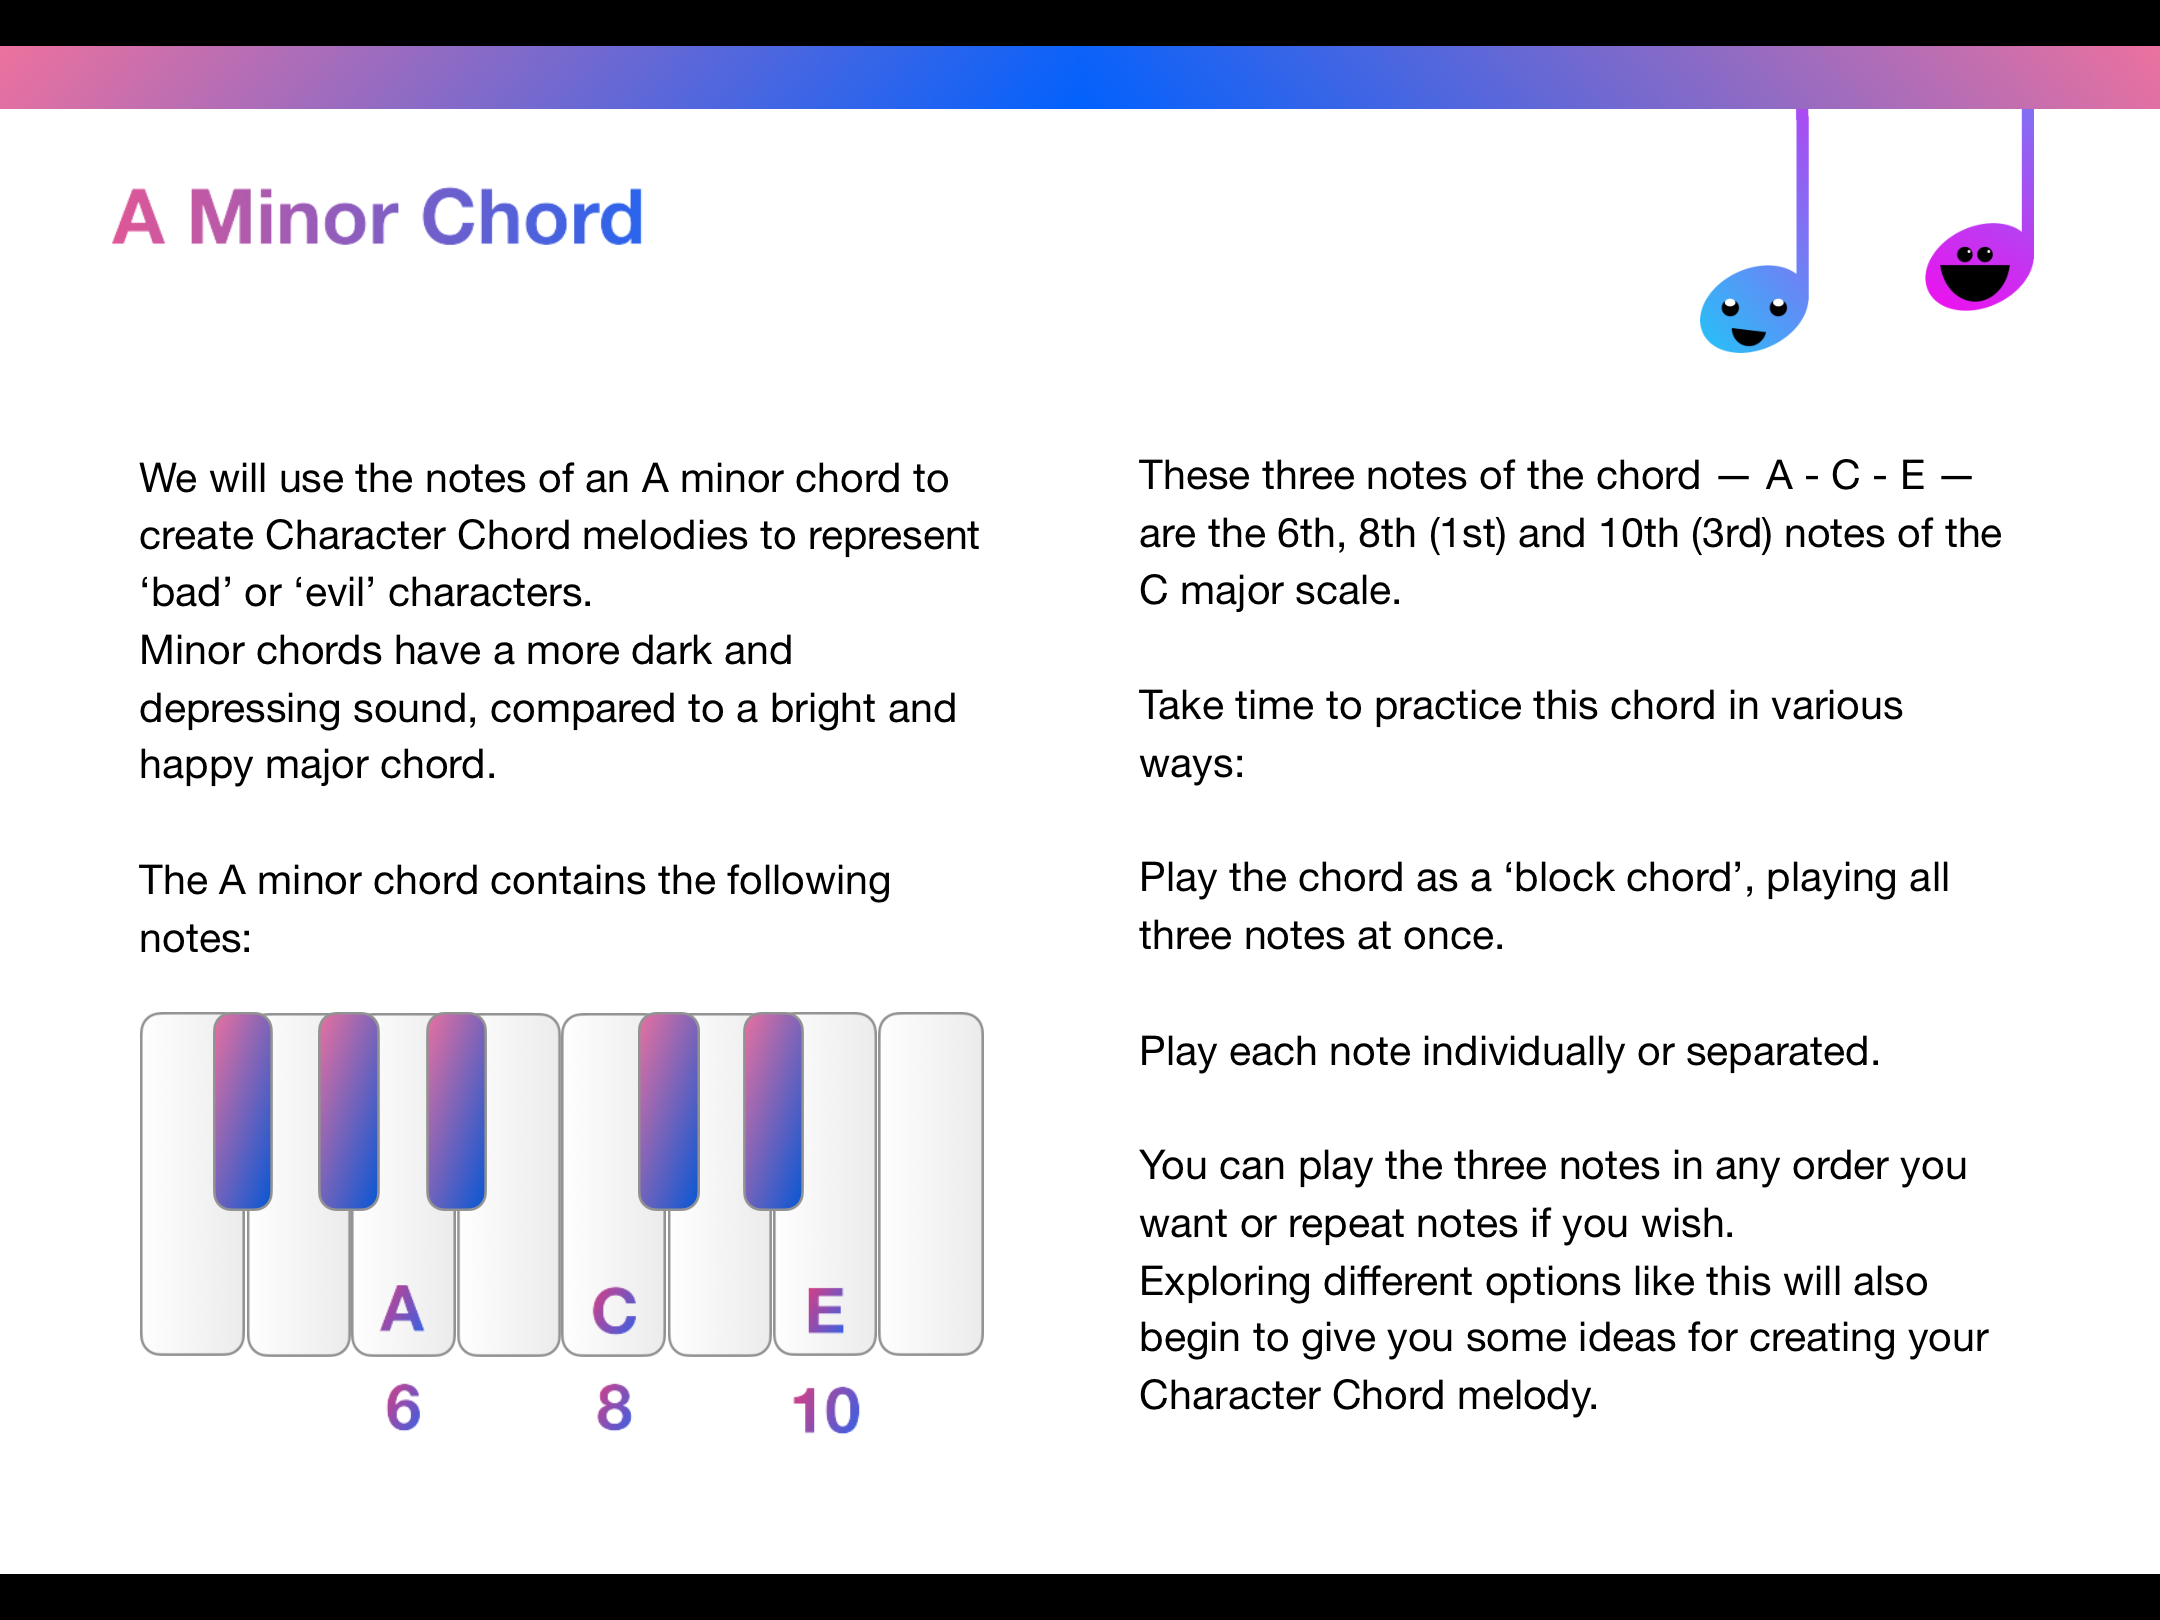 ‘A minor chord’ page from Character Chords, explaining the A minor chord and how to play it to create a chordal melody.